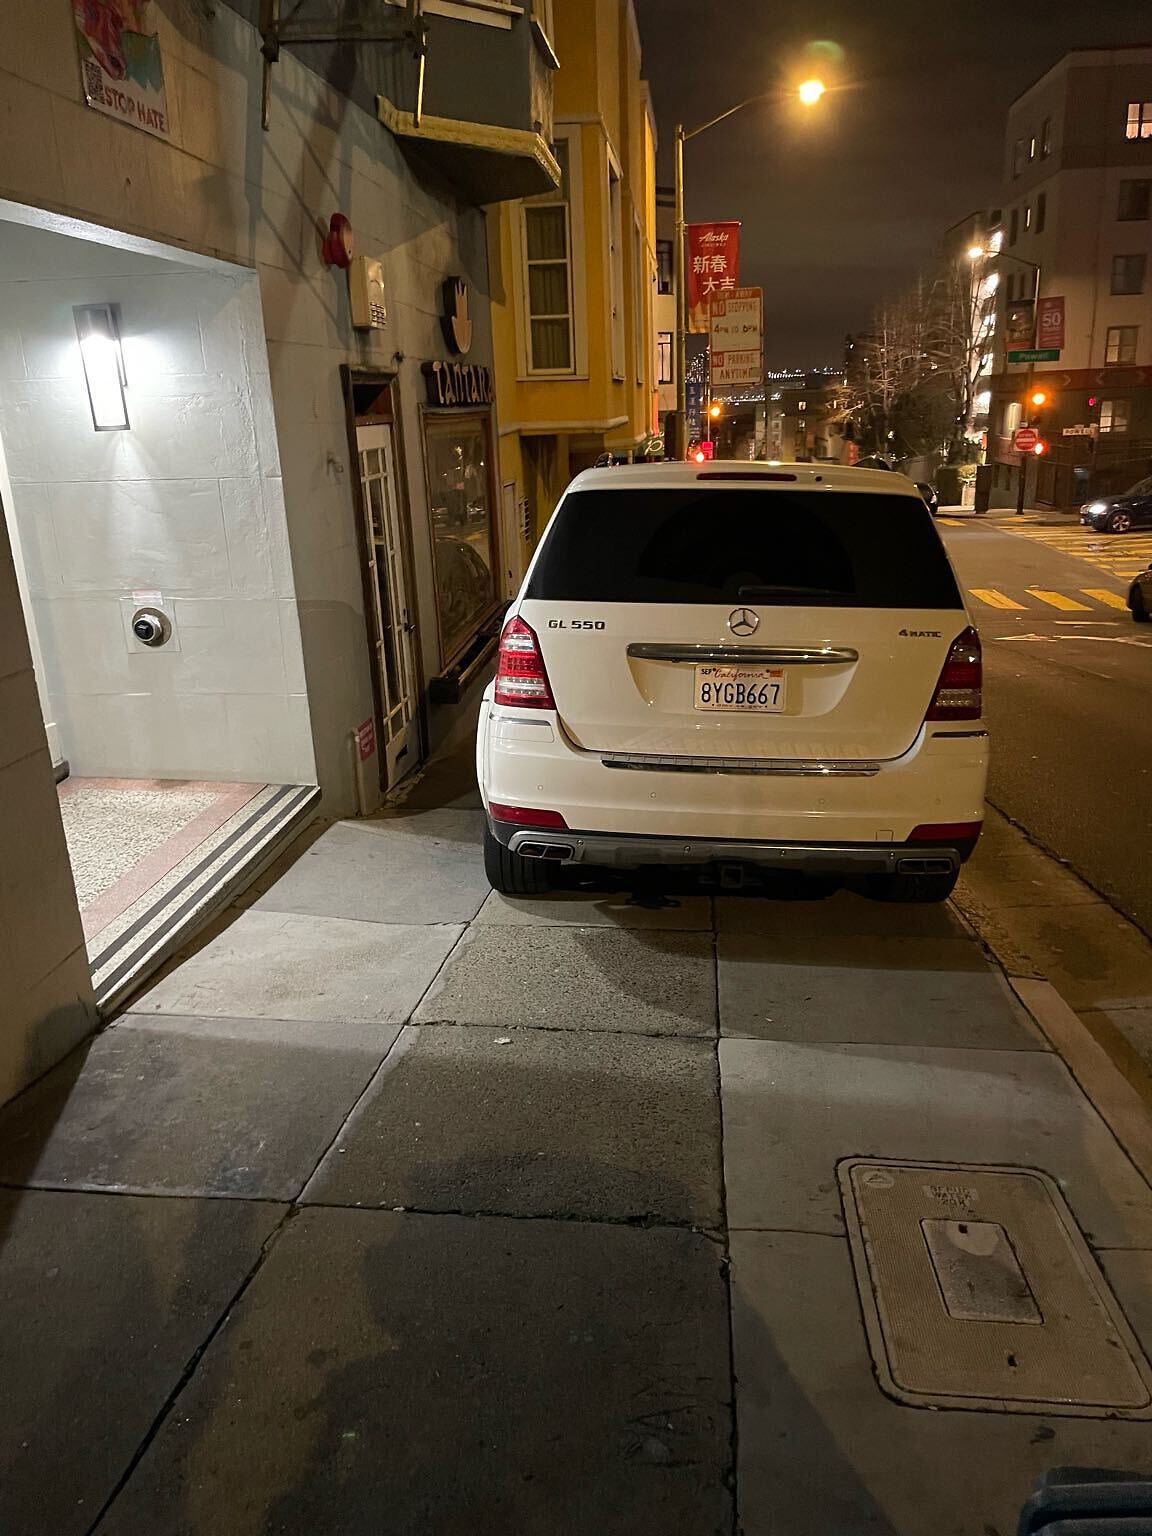 Photo of car in the street with license plate 8YGB667 in California